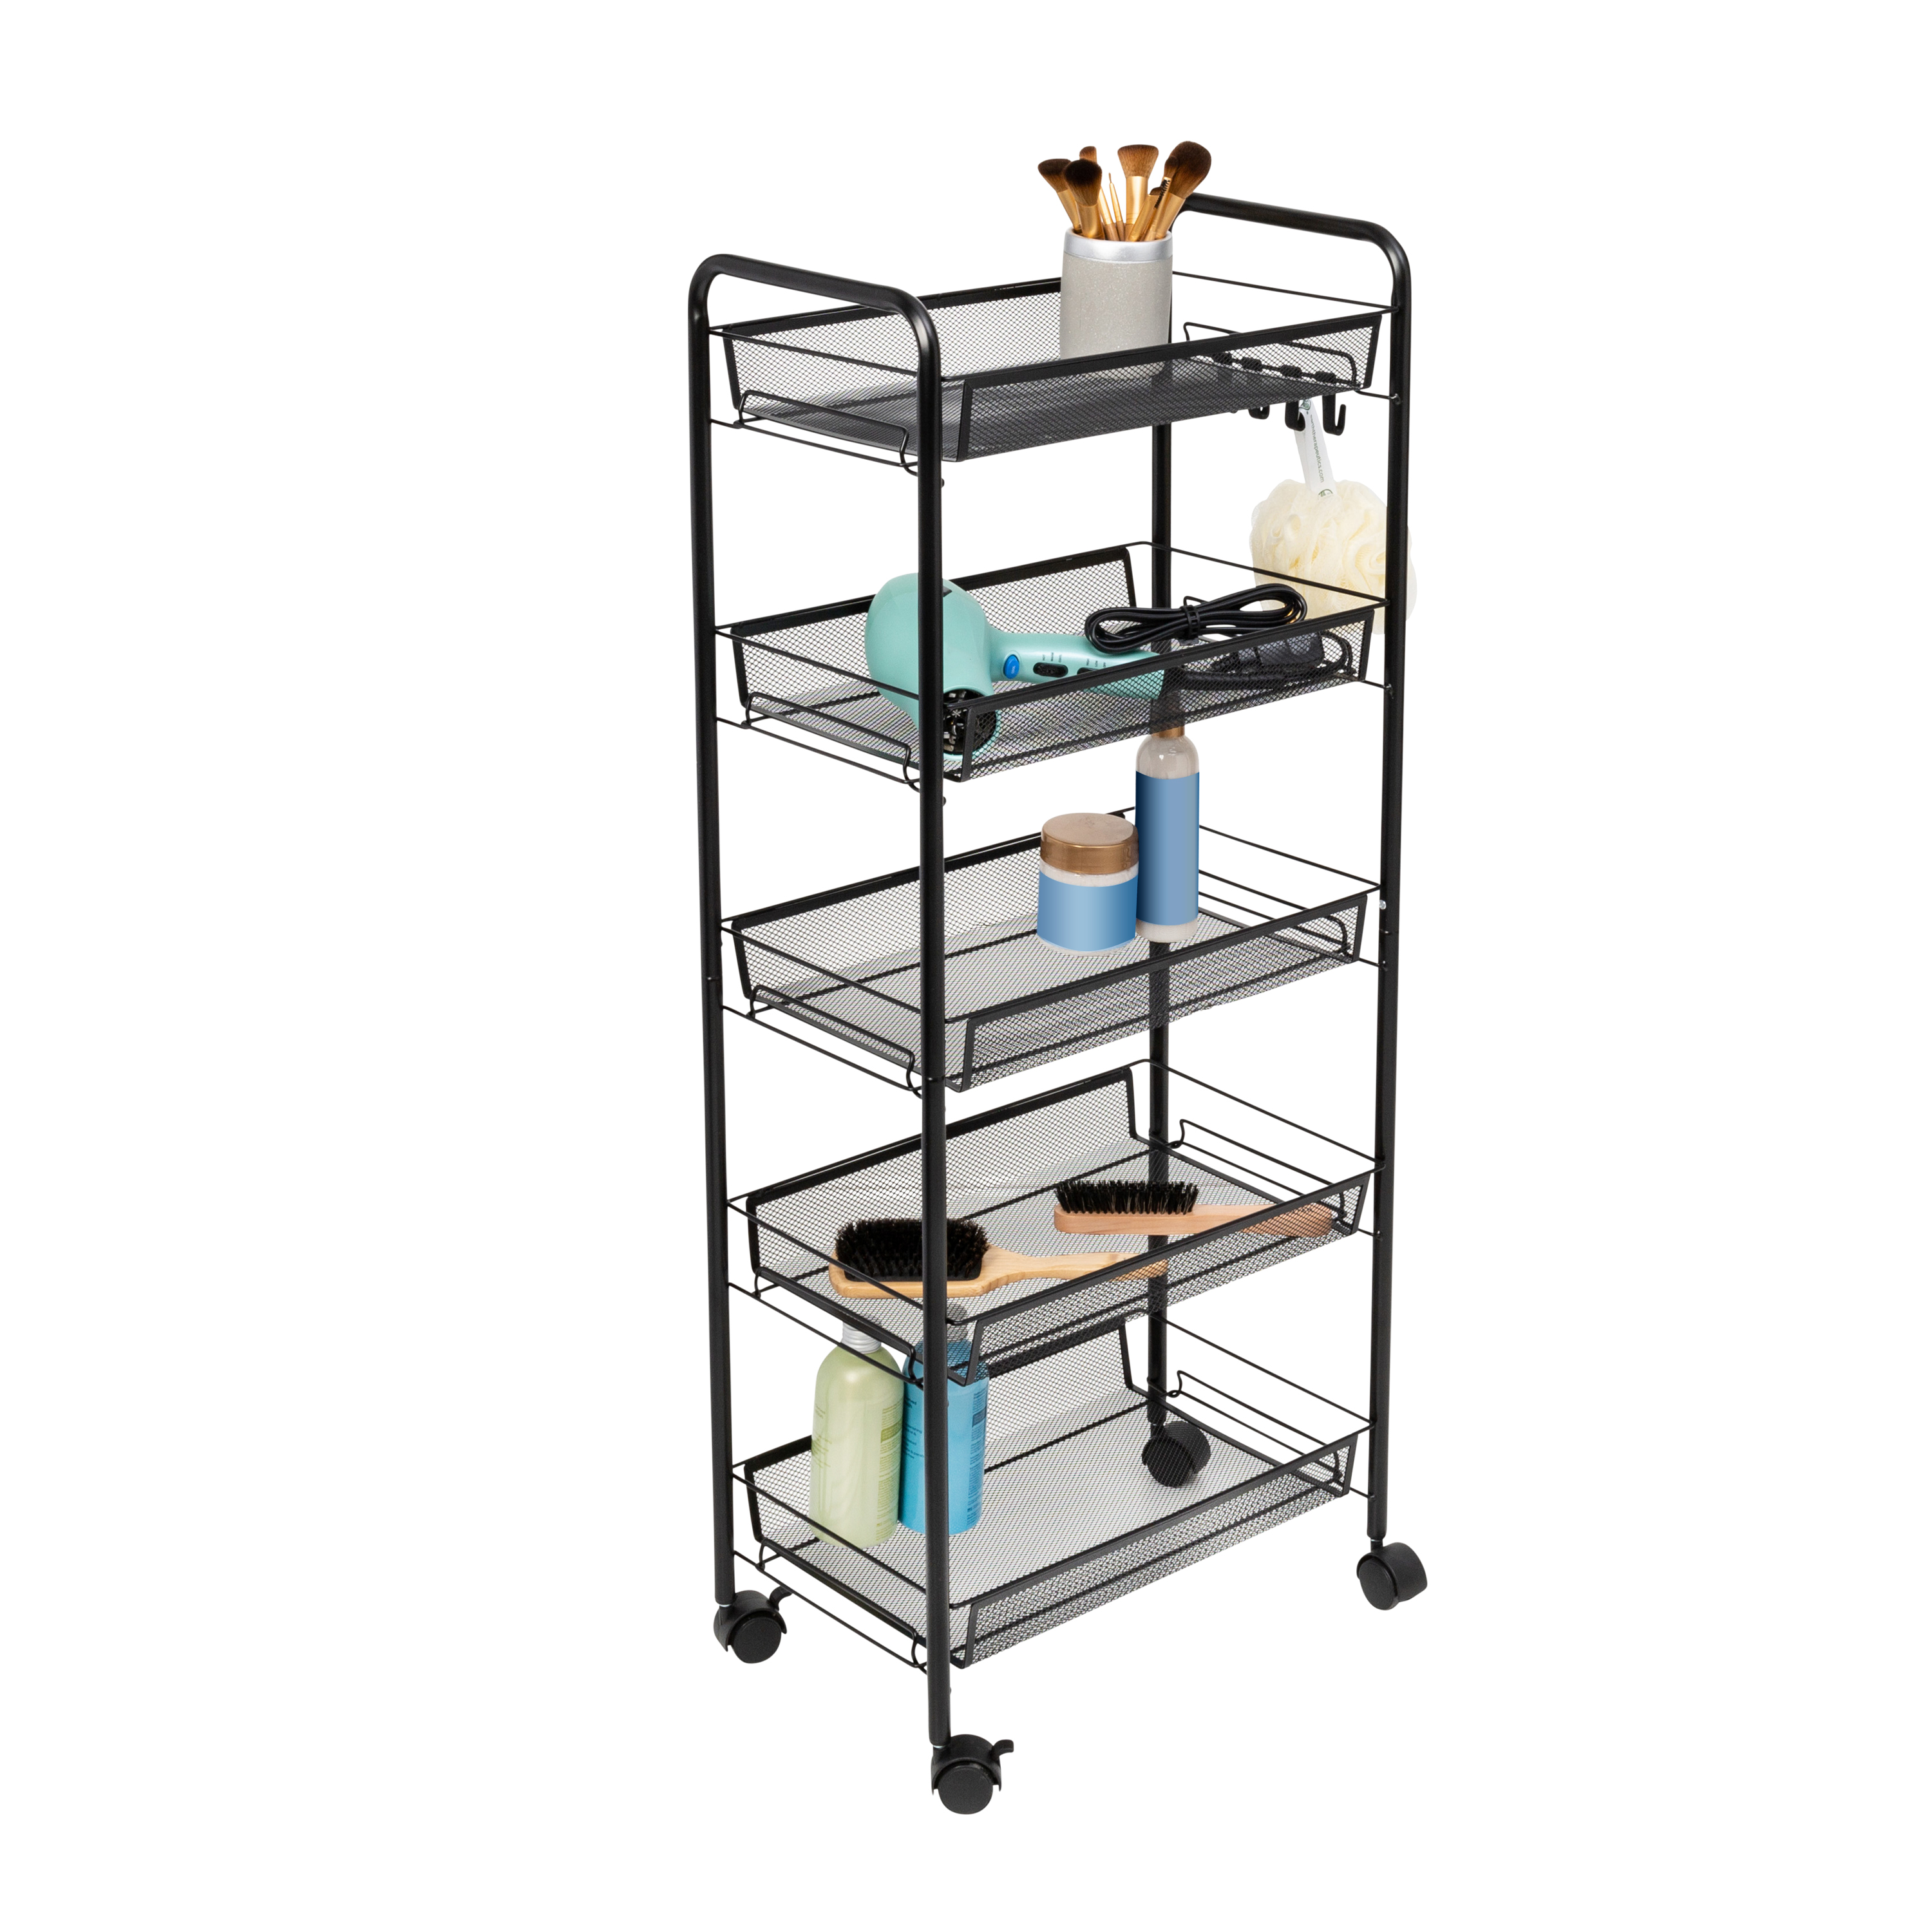 Honey-Can-Do Steel 5-Tier Rolling Storage Cart with 4 Hooks, Black - image 4 of 10